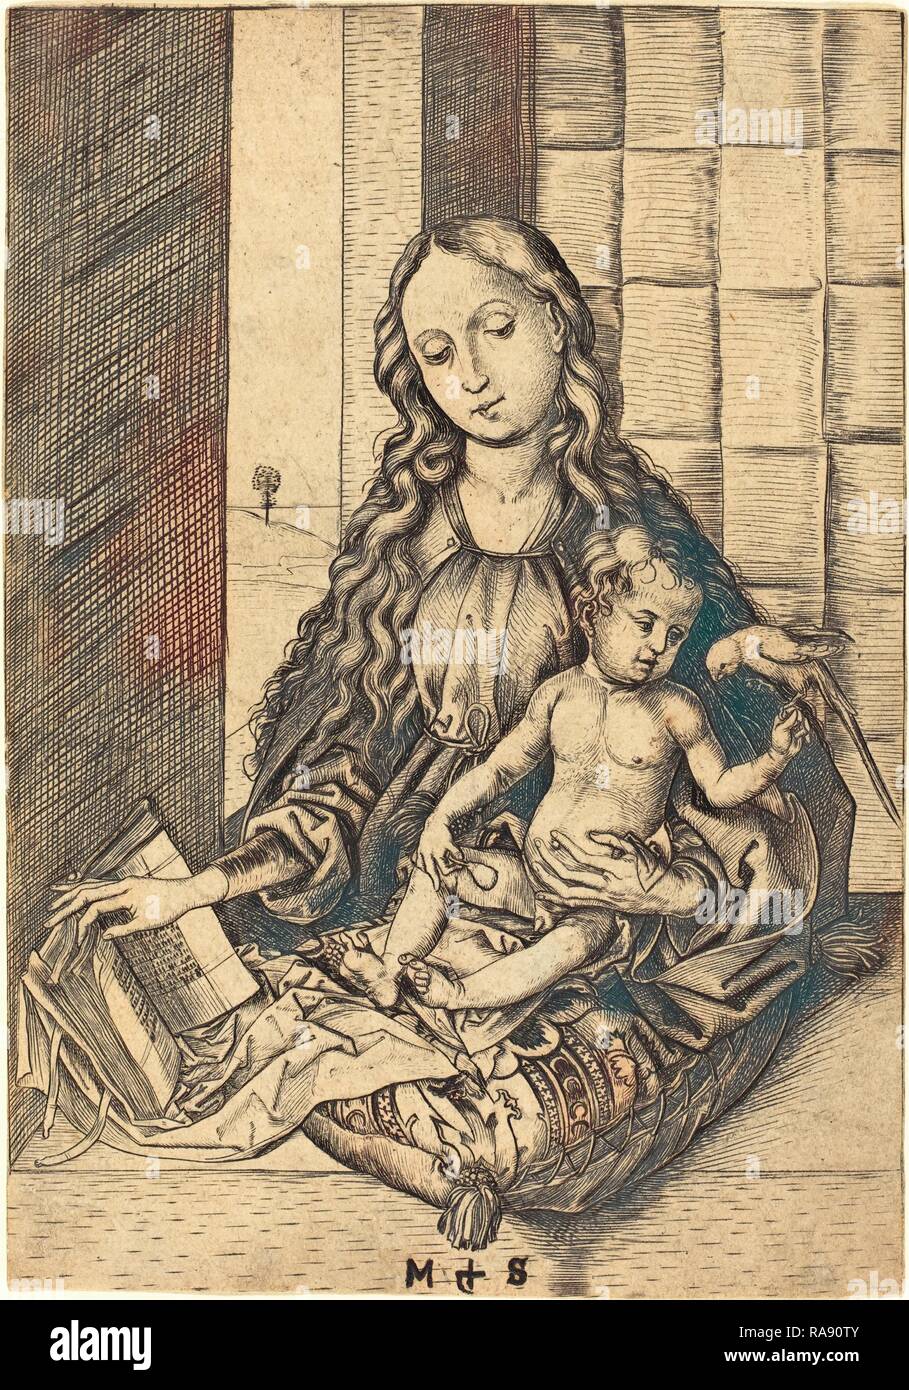 Martin Schongauer (German, c. 1450 - 1491), Madonna with a Parrot, c. 1470-1475, engraving. Reimagined Stock Photo